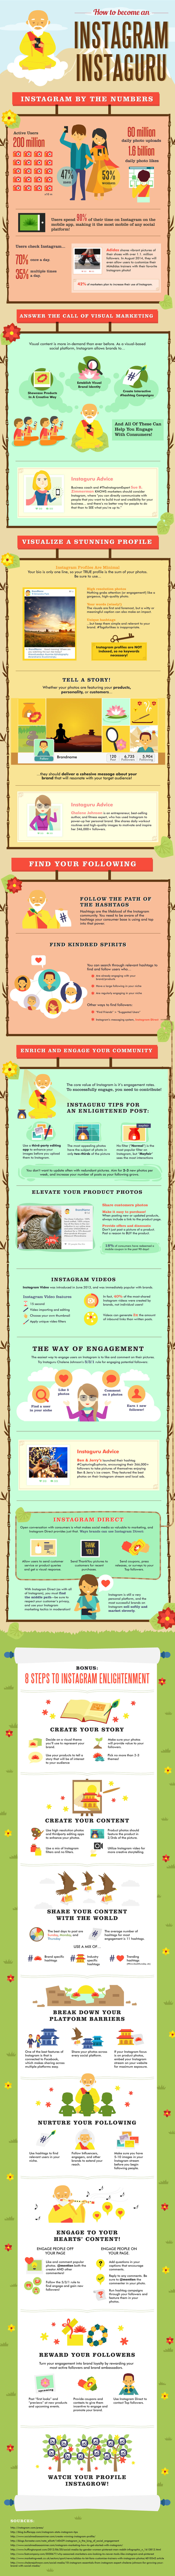 Instagram facts and figures